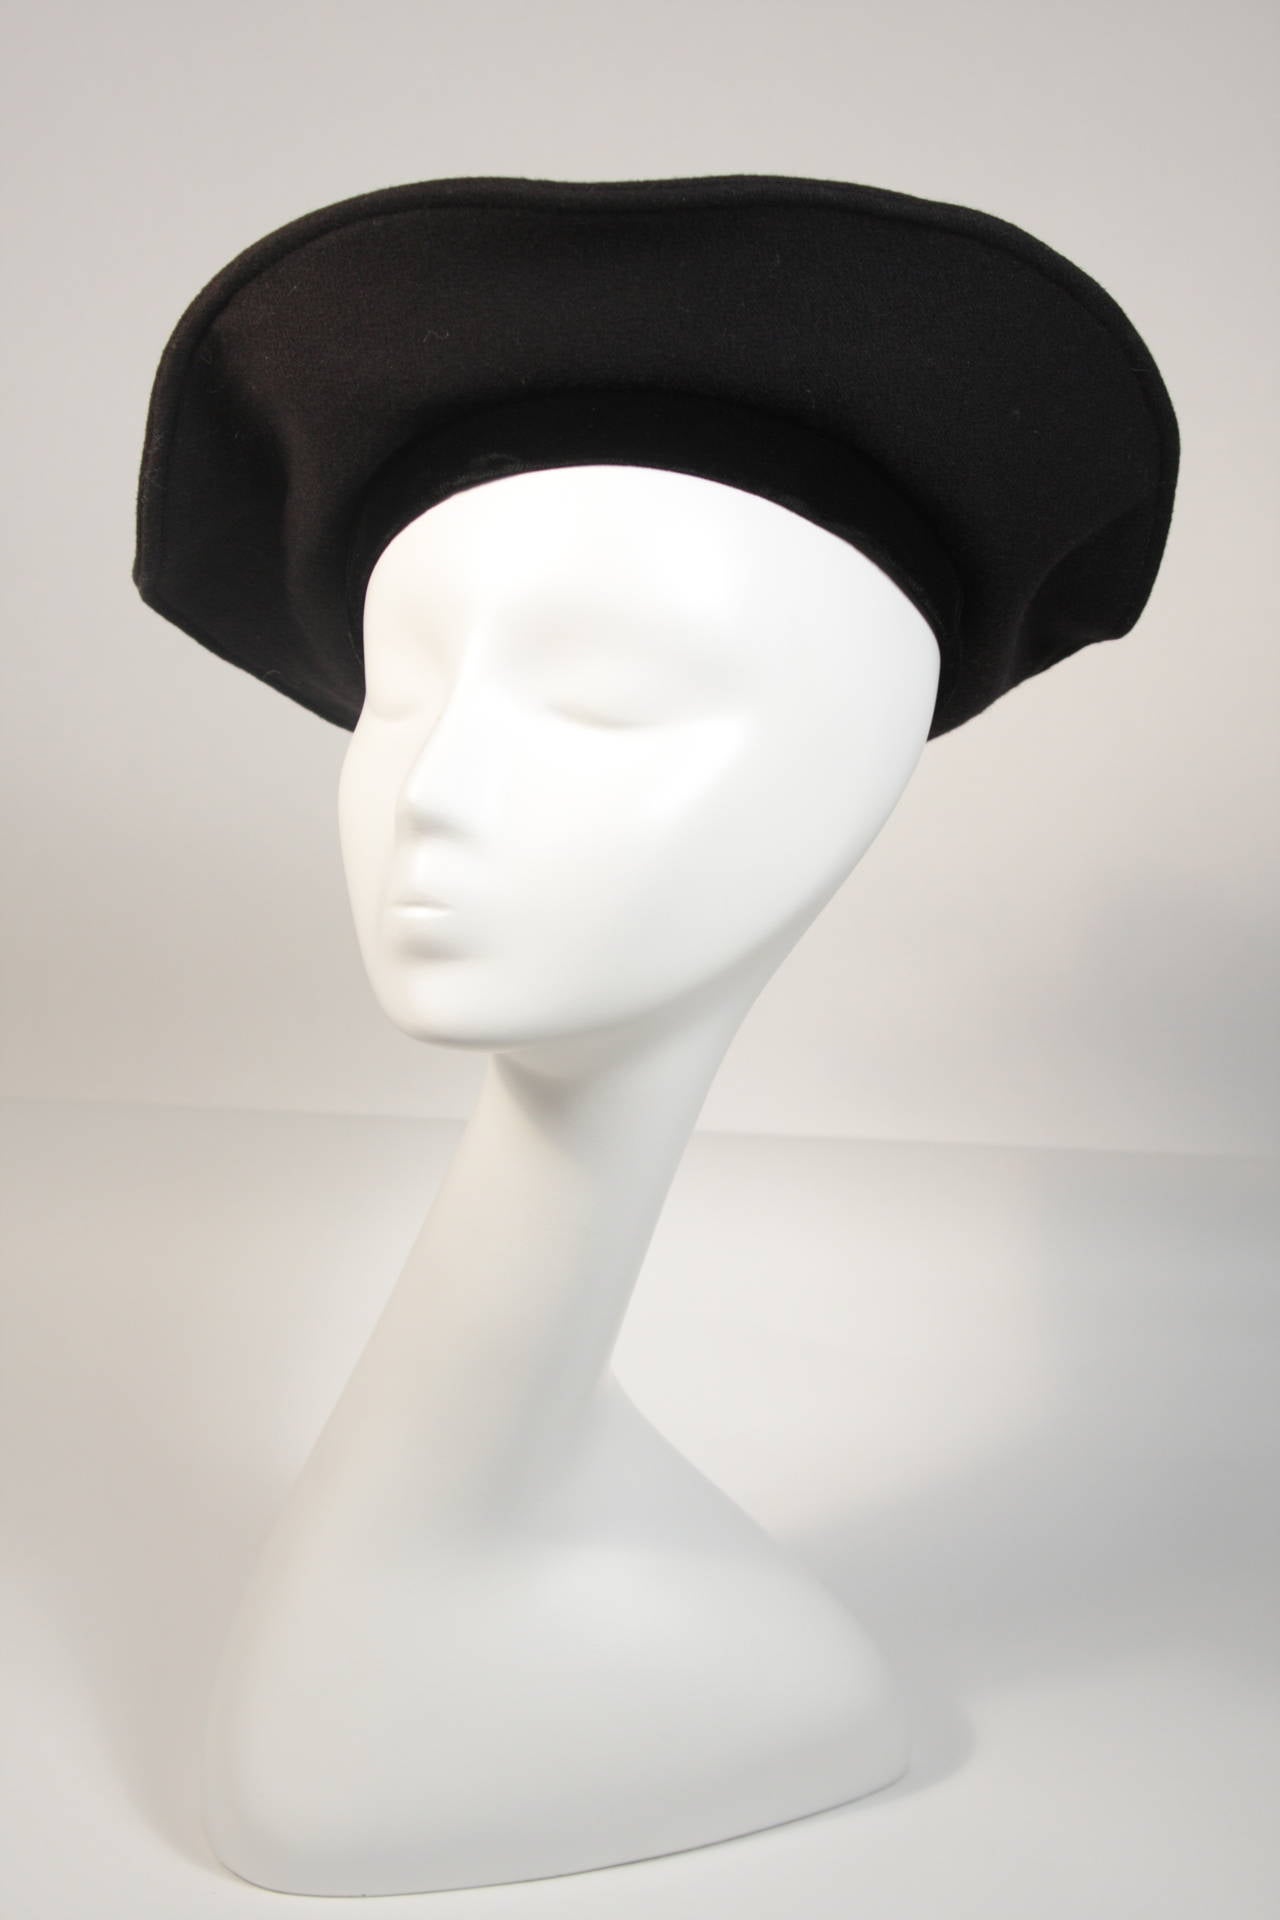 Yves Saint Laurent Rive Gauche Black Beret with Knit Ball For Sale 3